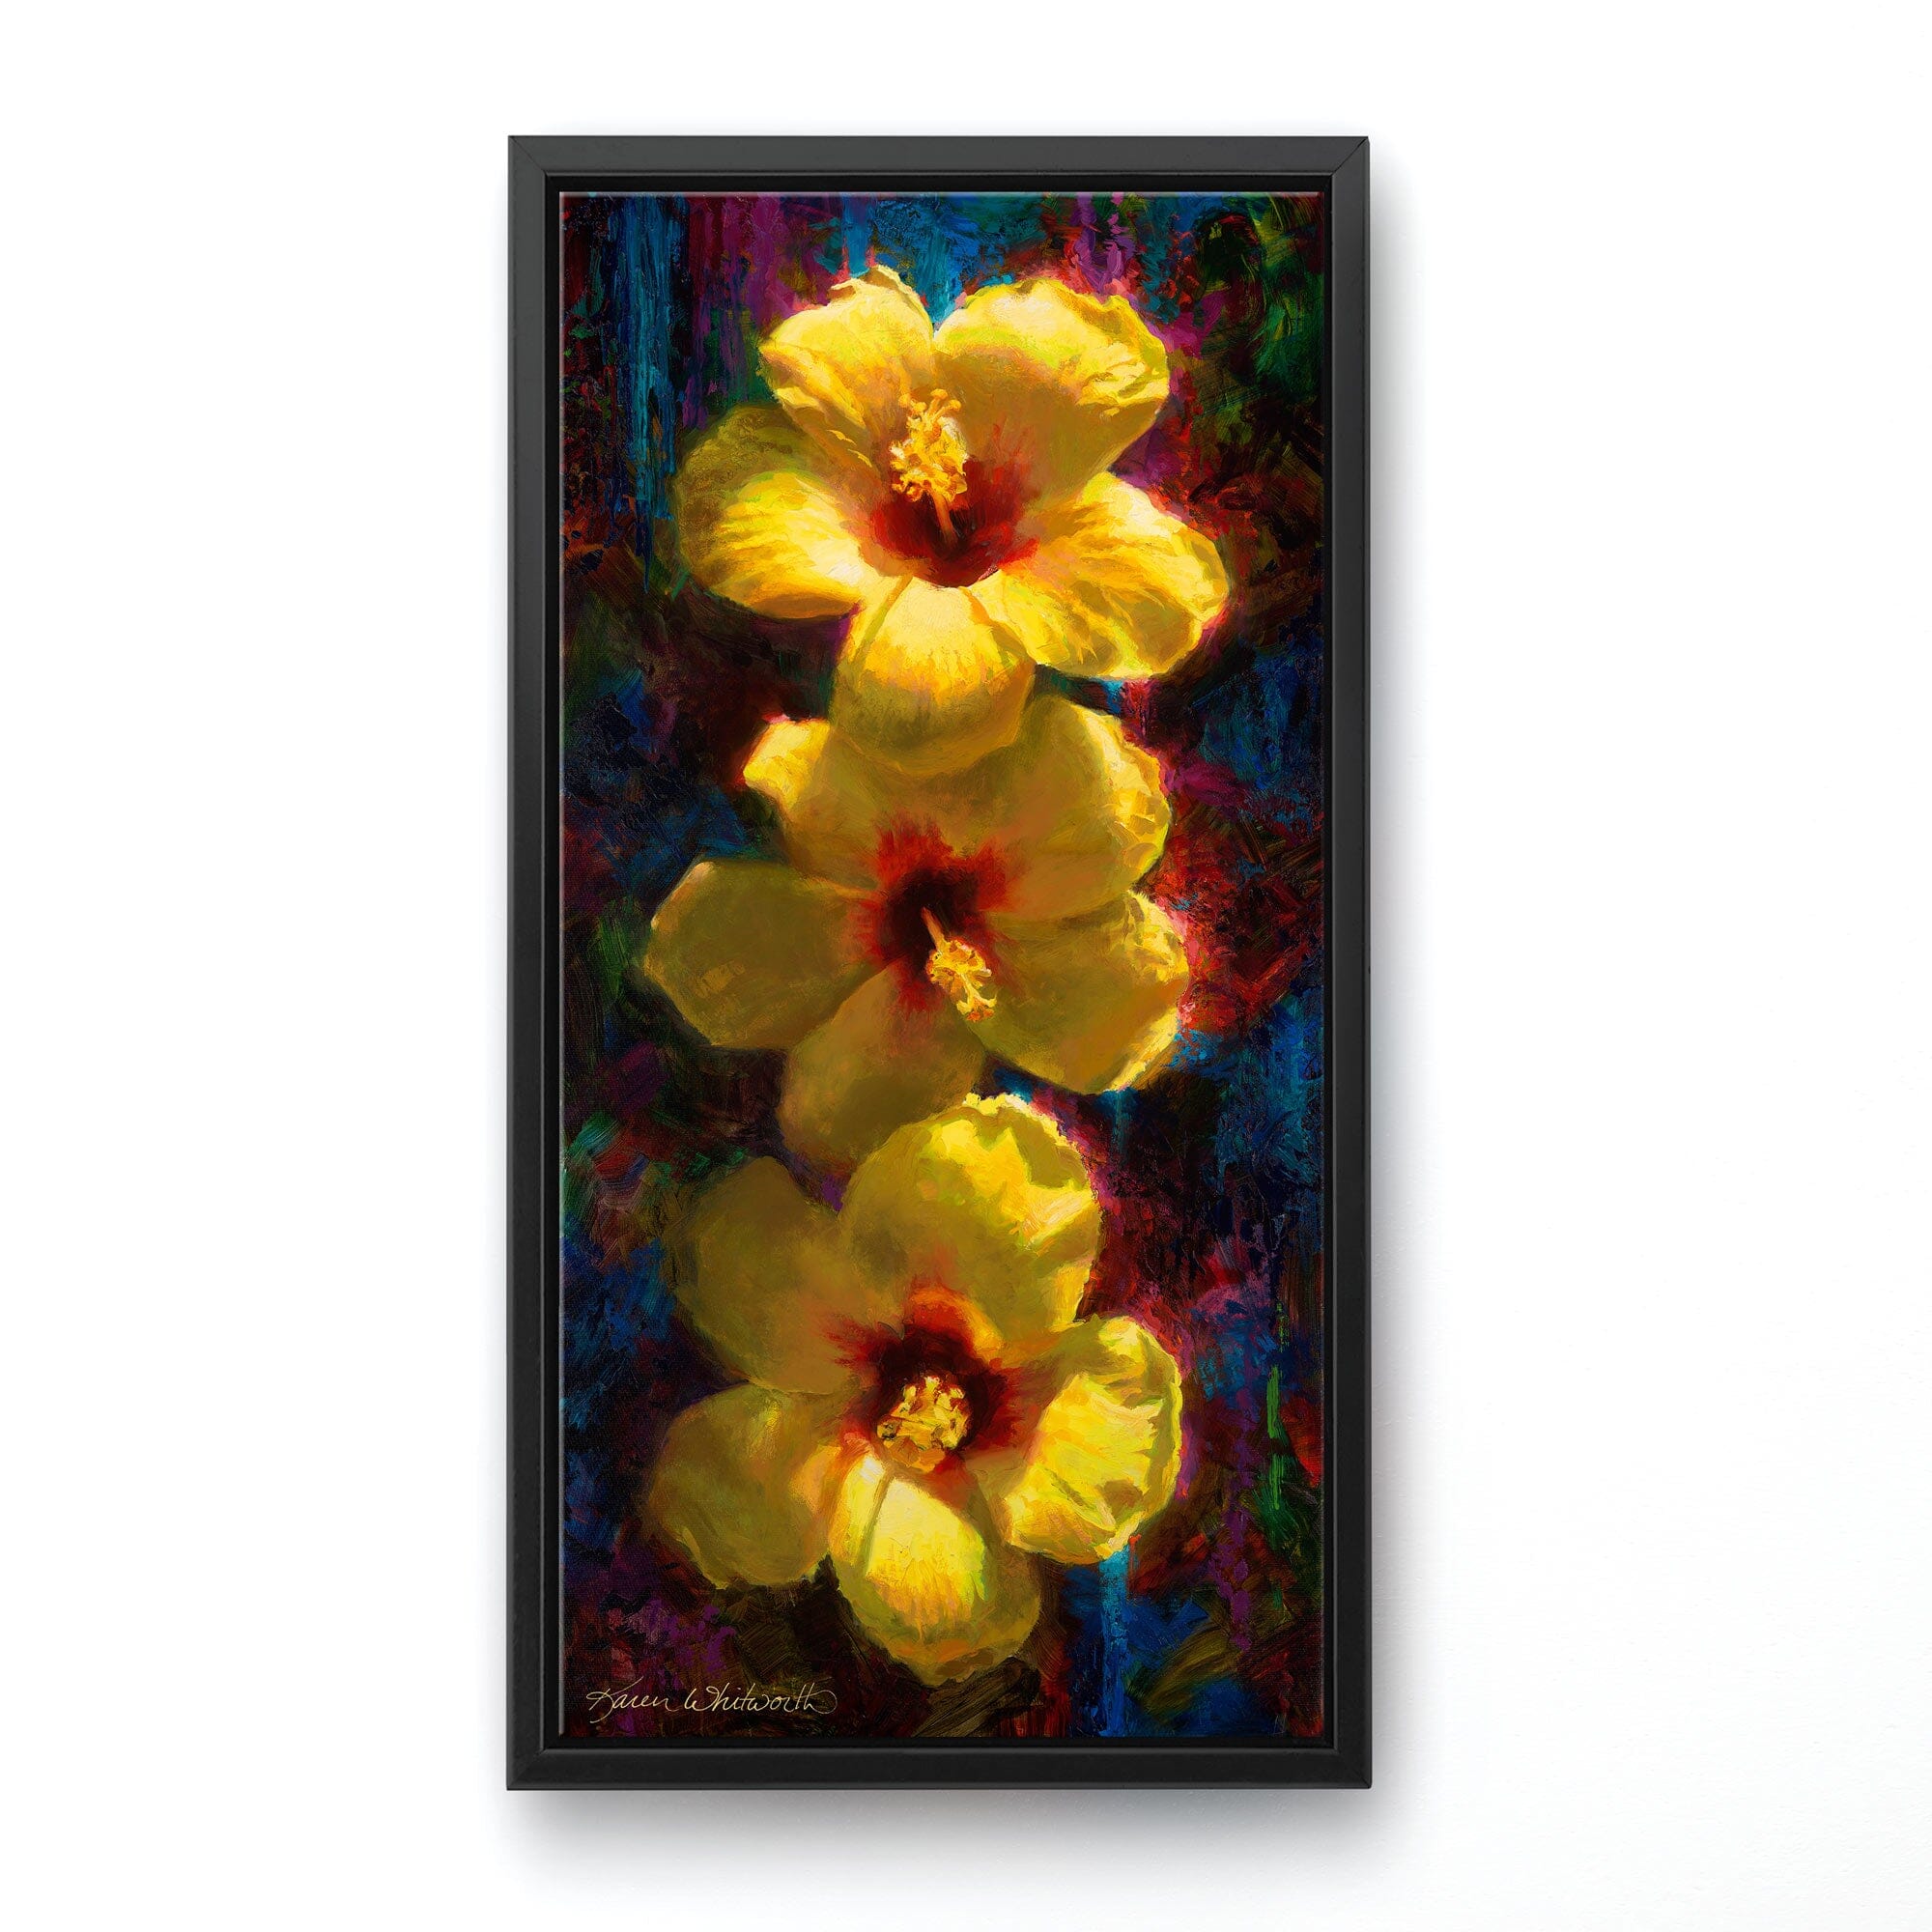 Vertical floral painting of tropical hibiscus flowers by artist Karen Whitworth. The 3 bright yellow flowers sit one on top of the other illuminated in sunlight against a dark background. The painting is framed in a sleek black contemporary frame and hanging on a white wall. 